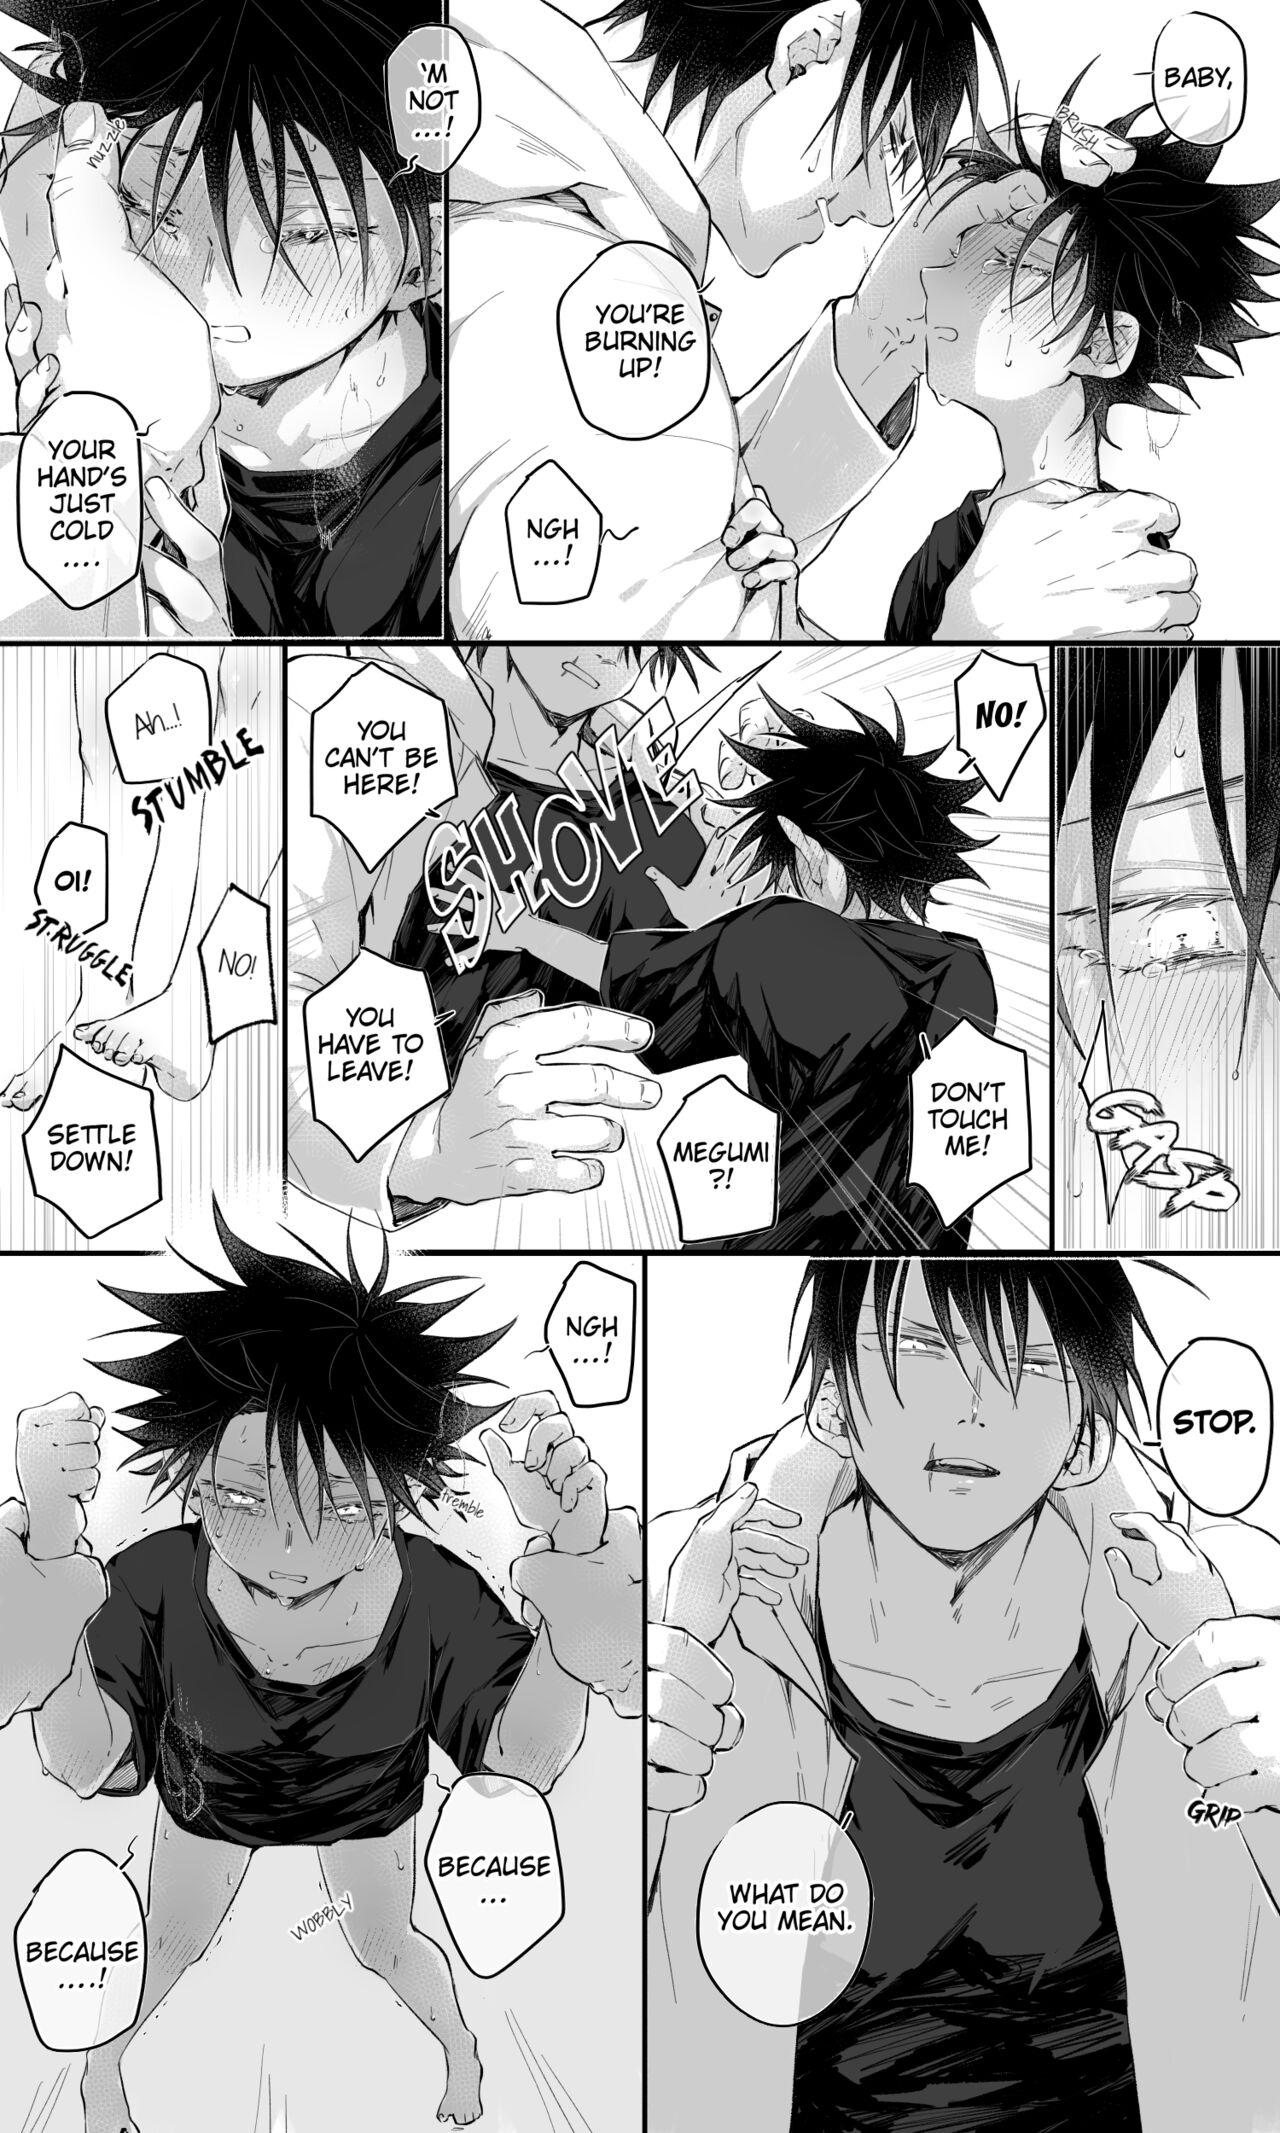 Phat Ass Shotagumi doesn’t feel well and gets hugs and kisses - Jujutsu kaisen Hungarian - Page 2